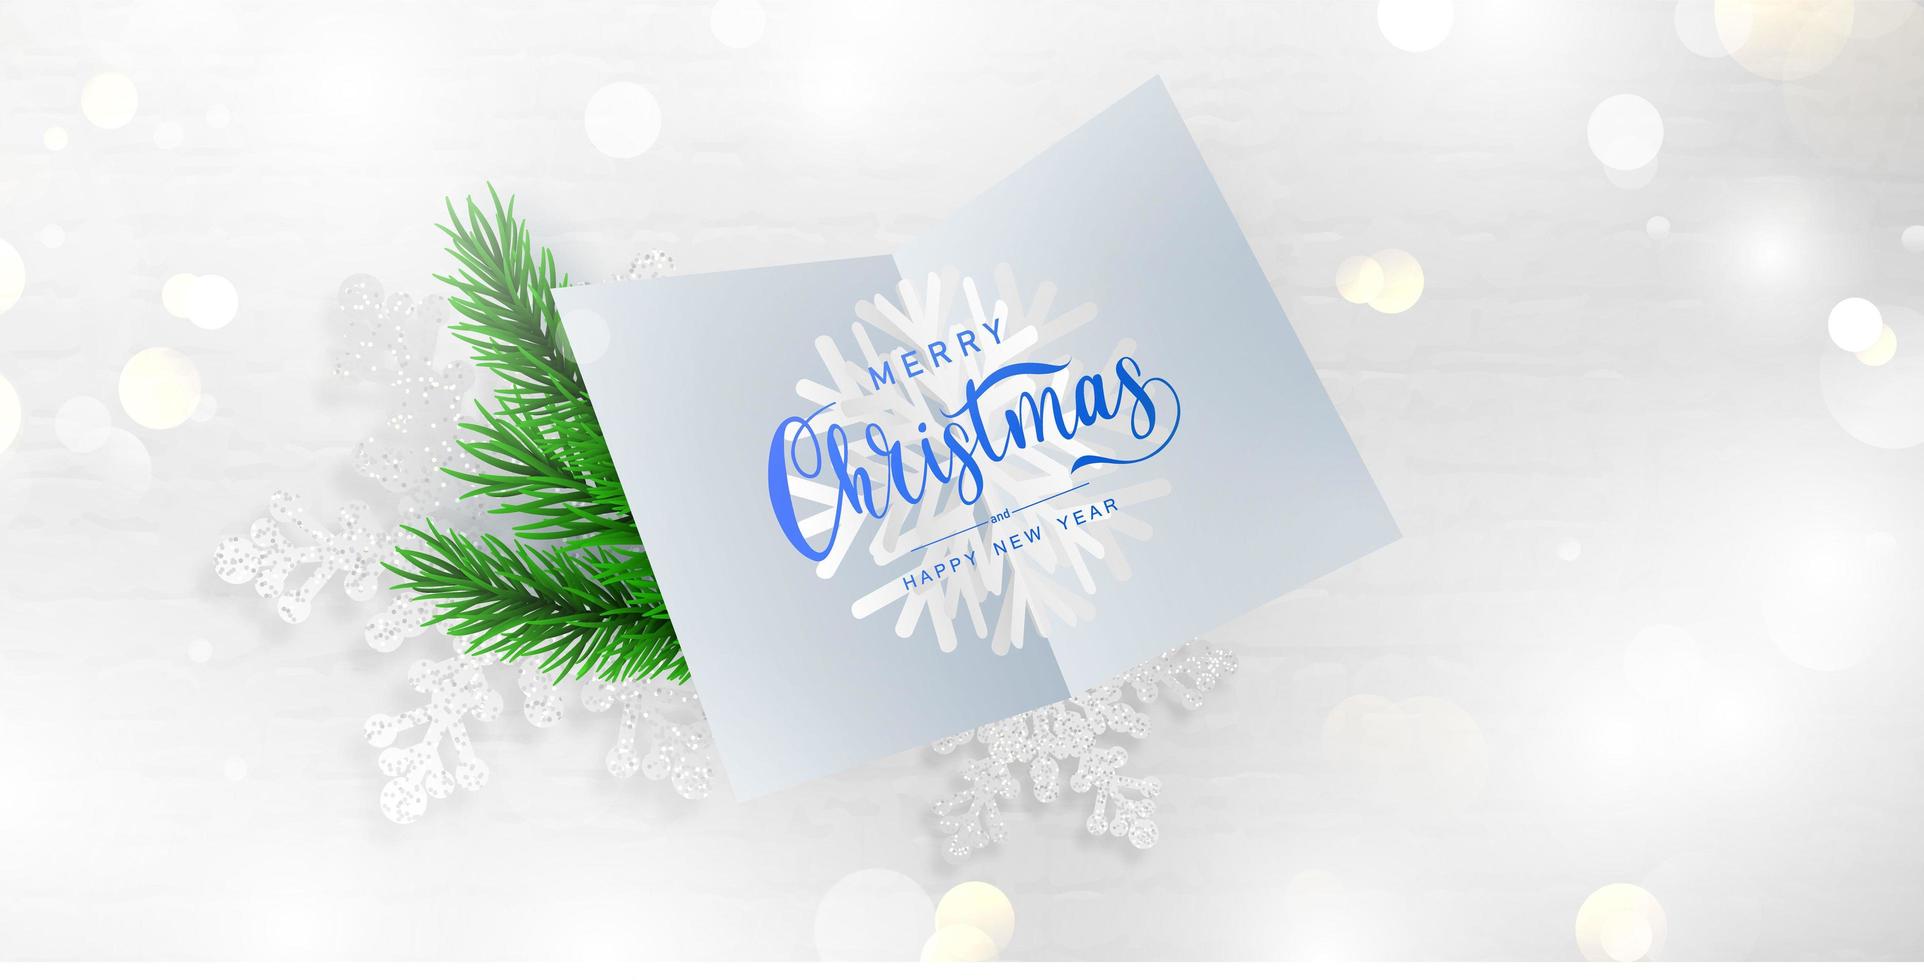 Merry Christmas and Happy New Year card and branches background. vector